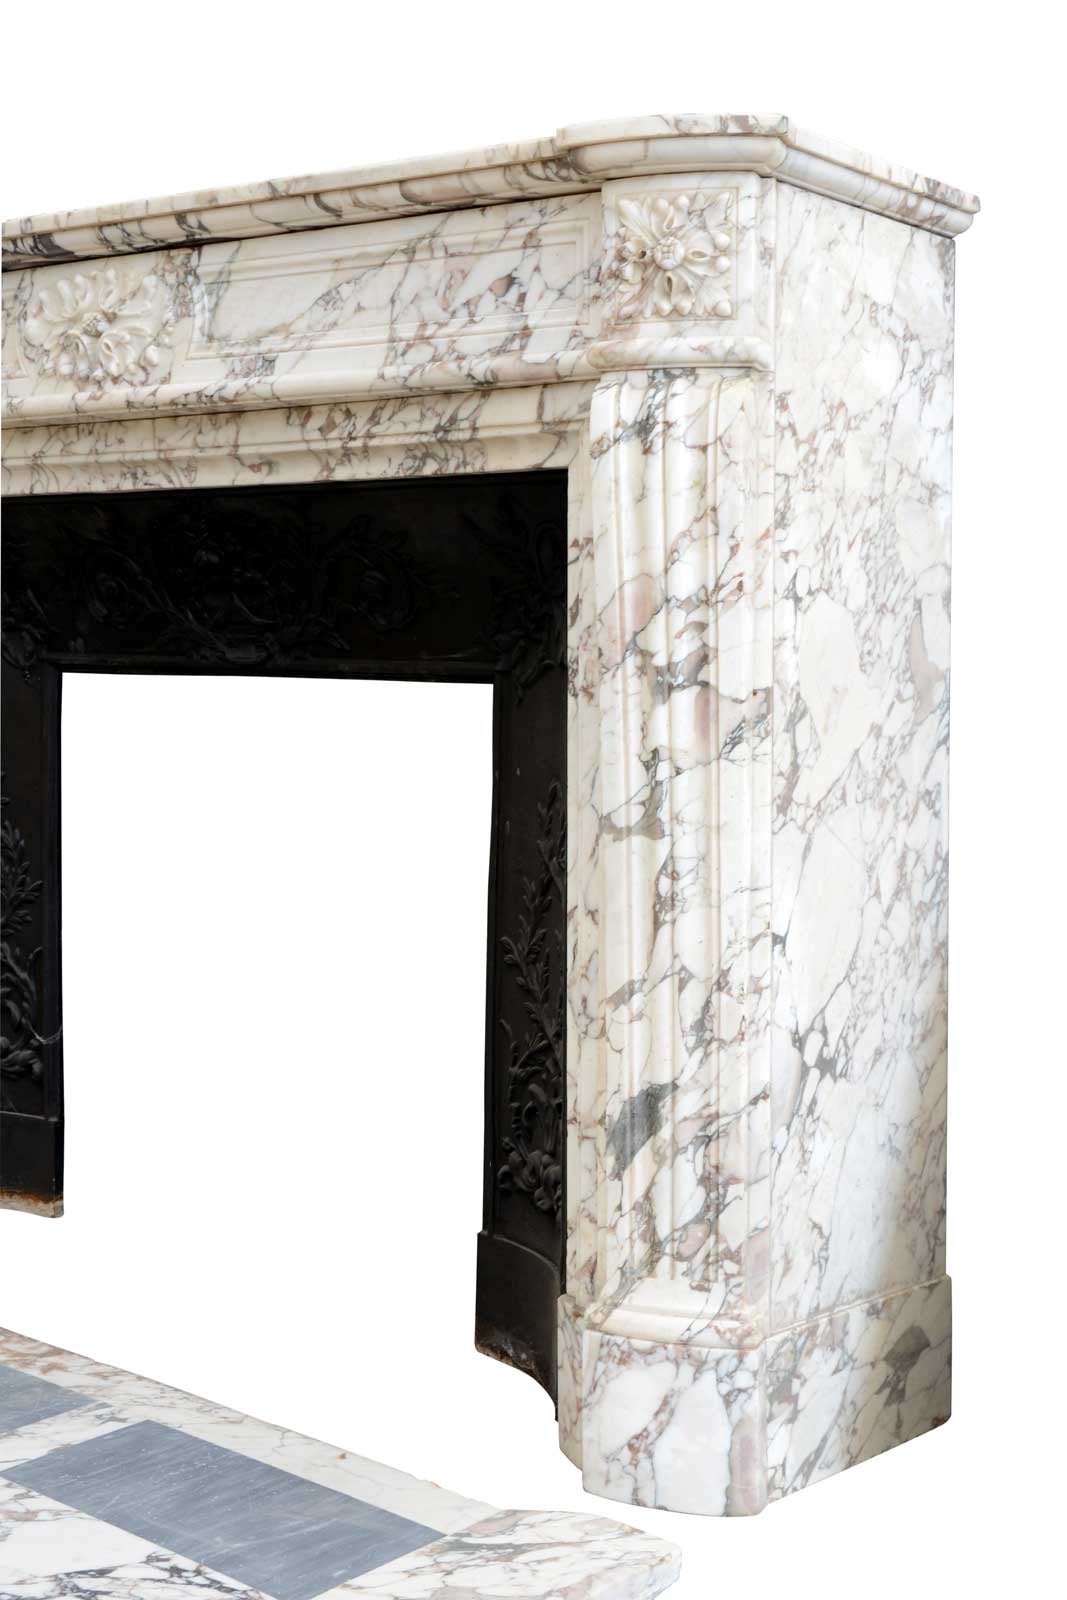 French Louis XVI Style Arabescato Marble Fireplace, 19th Century